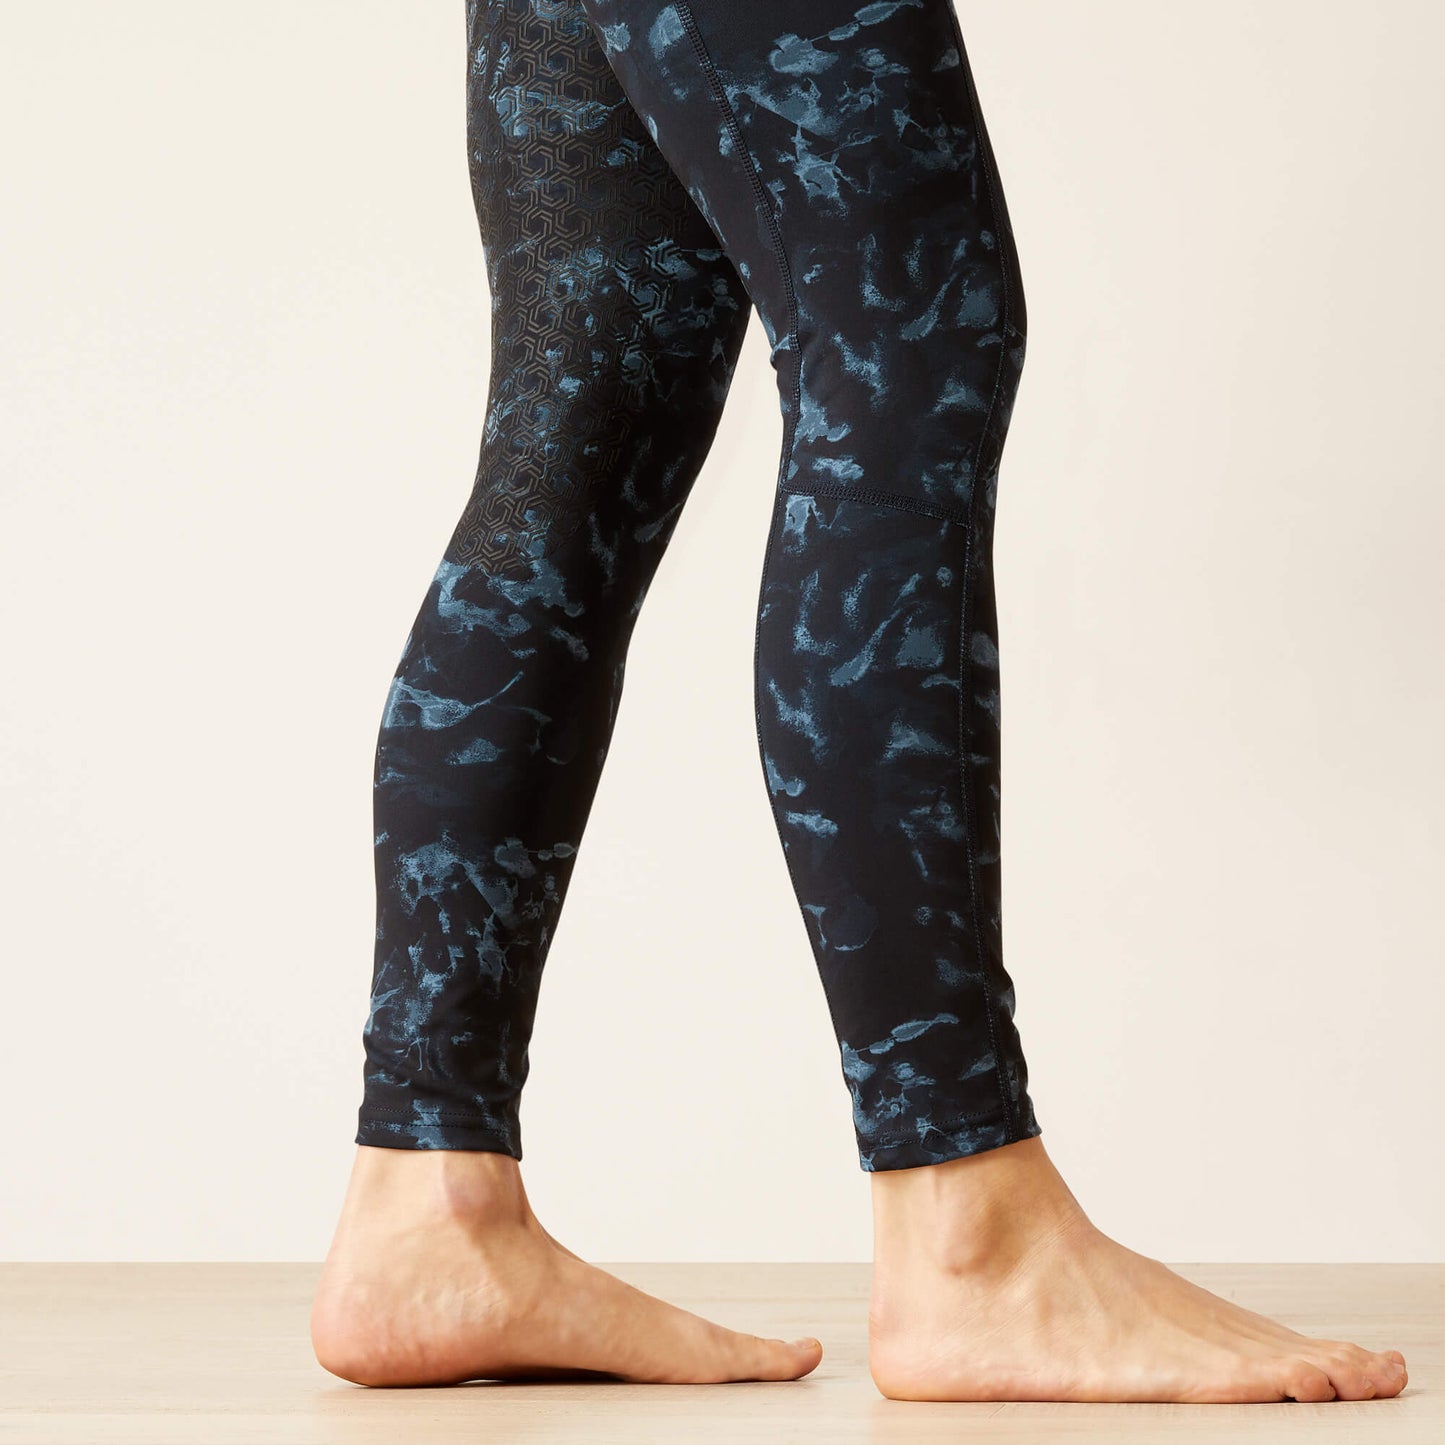 Ariat Stormy Skies EOS Print Riding Tights with Full Silicone Seat